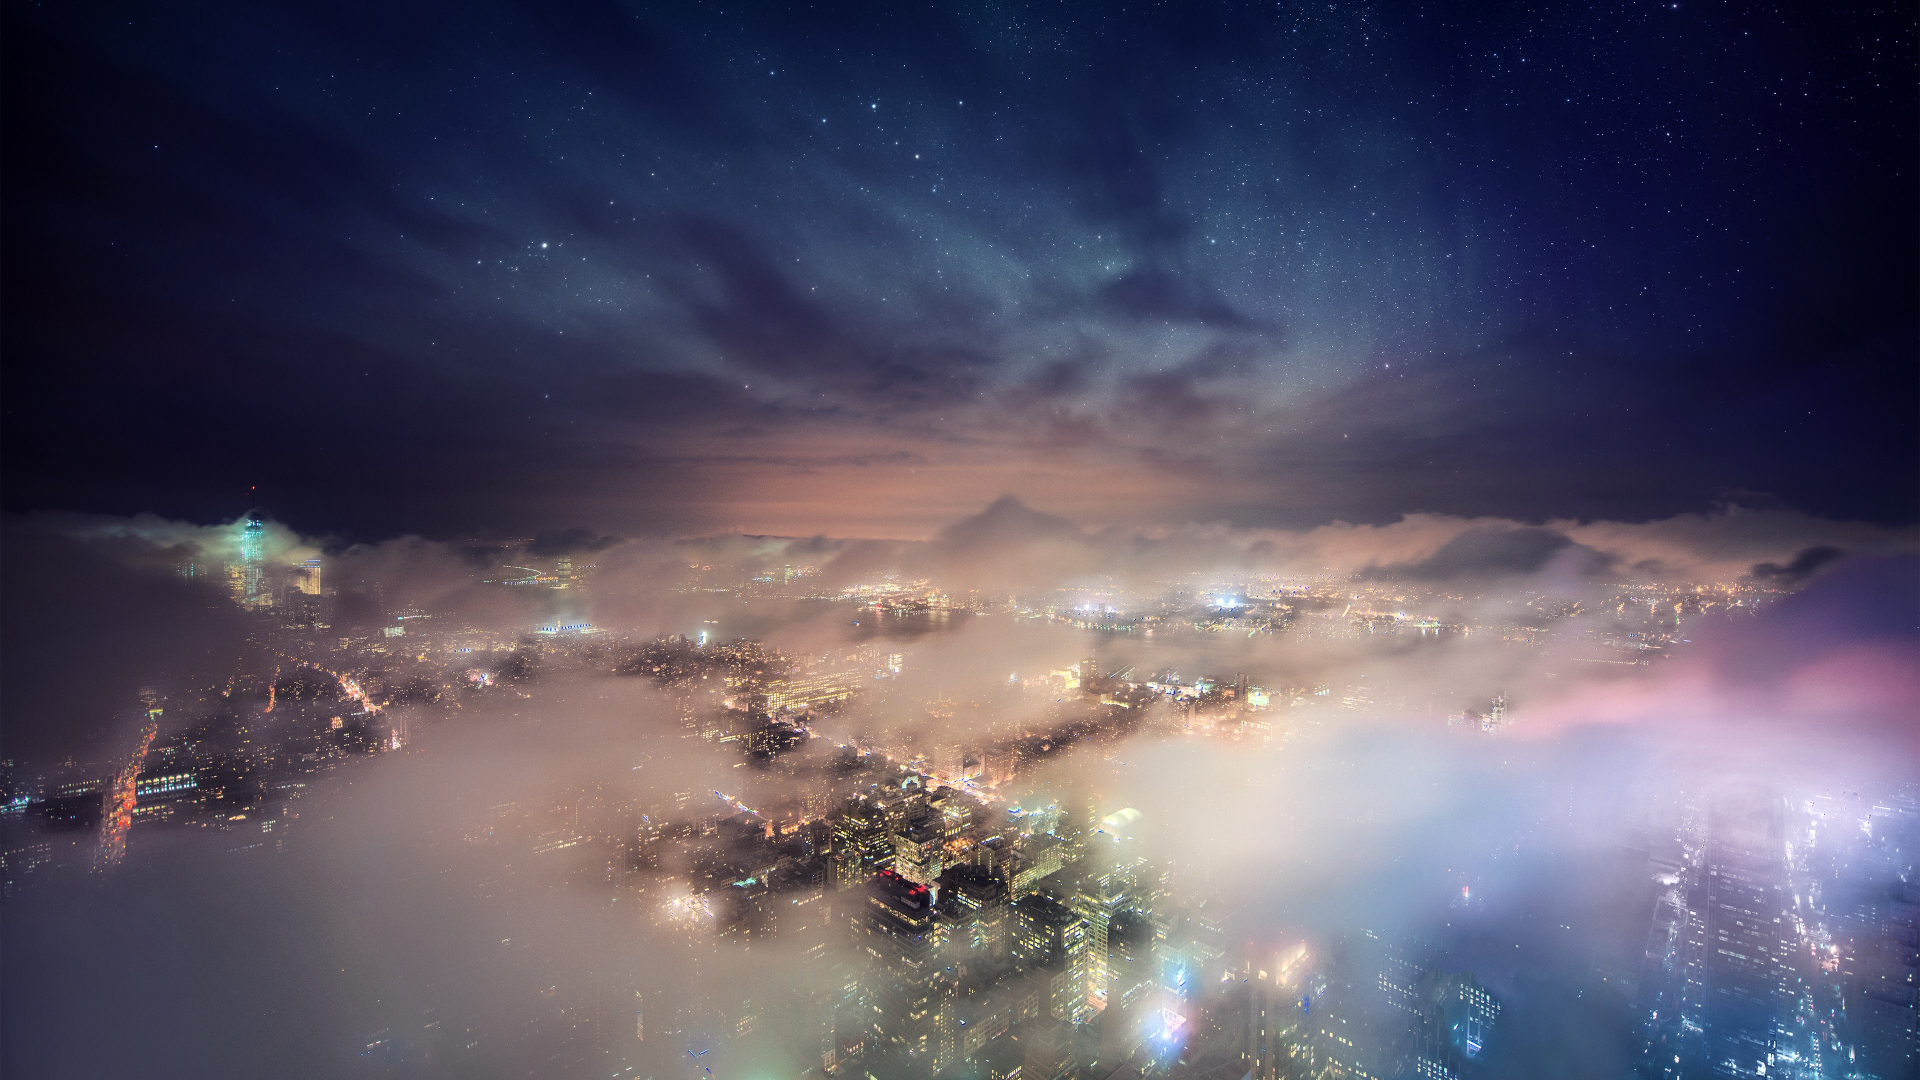 Desktop Wallpaper Clouds And City In Night Hd Image Picture